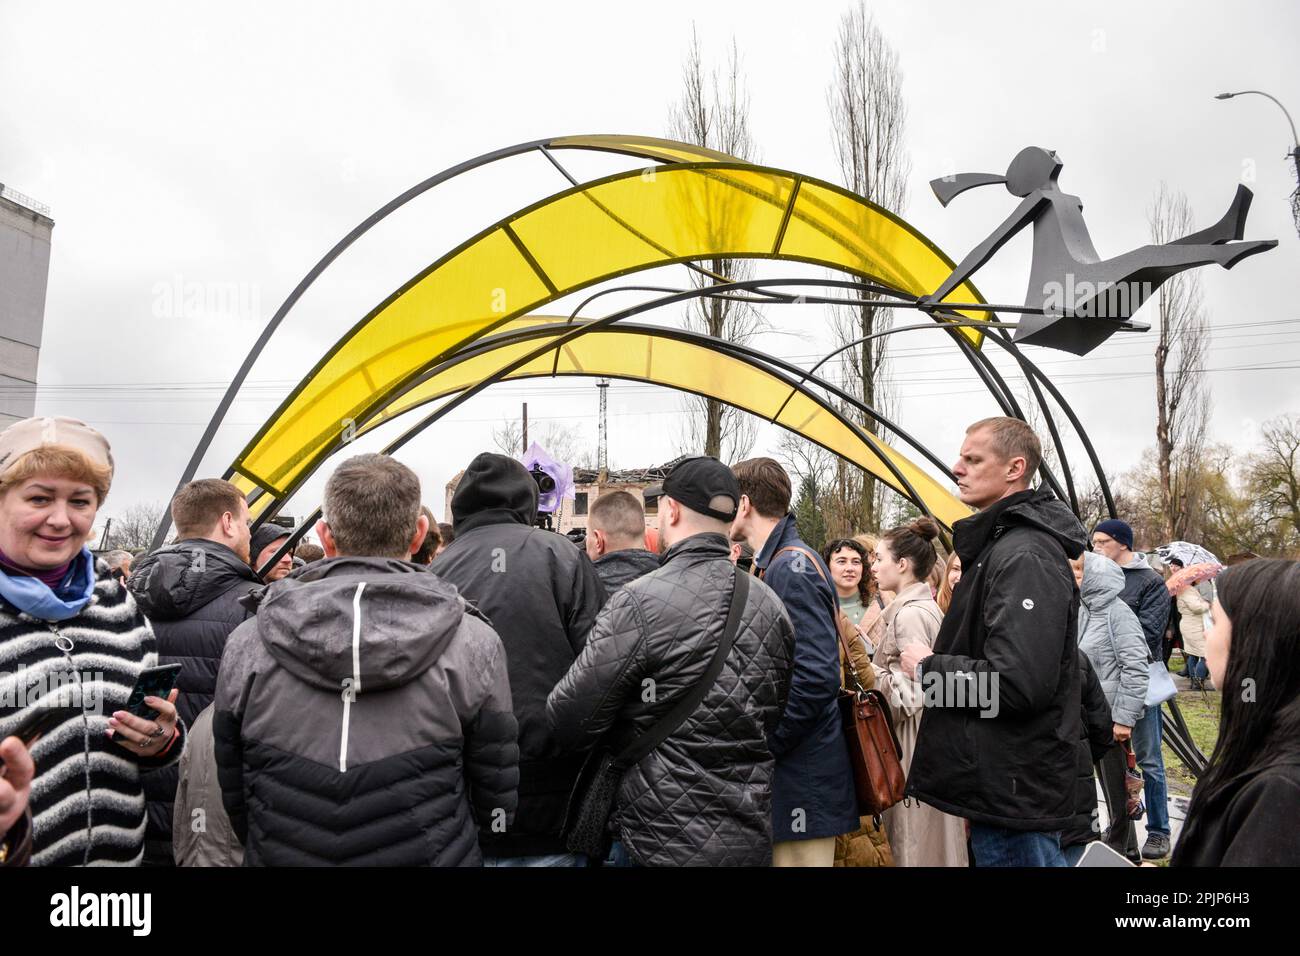 People look at the sculpture "Girl under the sun" in Borodyanka. The sculpture "Girl under the sun" was opened in Borordyanka in honor of the anniversary of the de-occupation of Kyiv region. The four-meter sculpture represents the victory of life over destruction, and its arches will symbolize the resistance of seven districts of Kyiv region and the capital. This is how the symbolic date was celebrated - a year ago, the Armed Forces of Ukraine completely liberated the Kyiv region from the Russian invaders. "The sculpture reflects the powerful contrast of life and destruction that accompanied U Stock Photo